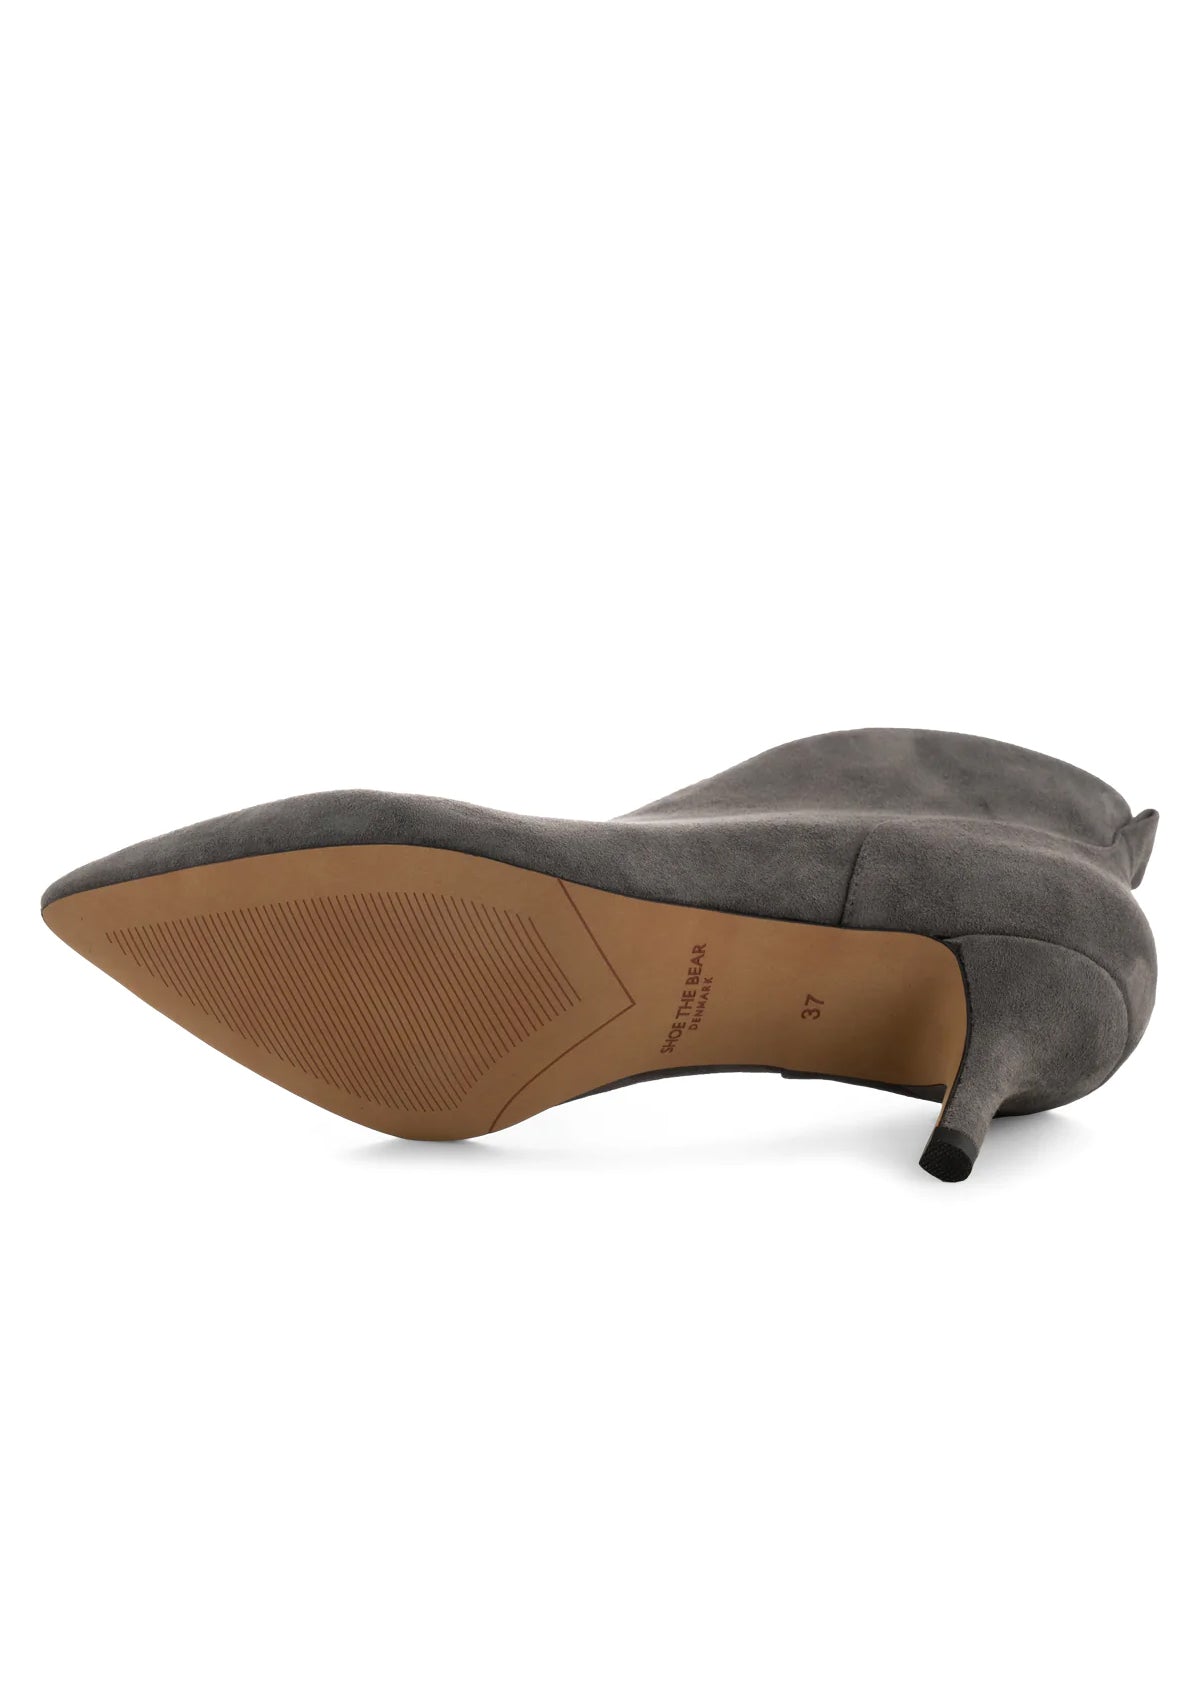 Shoe The Bear Valentine Shoe Boot Grey Suede